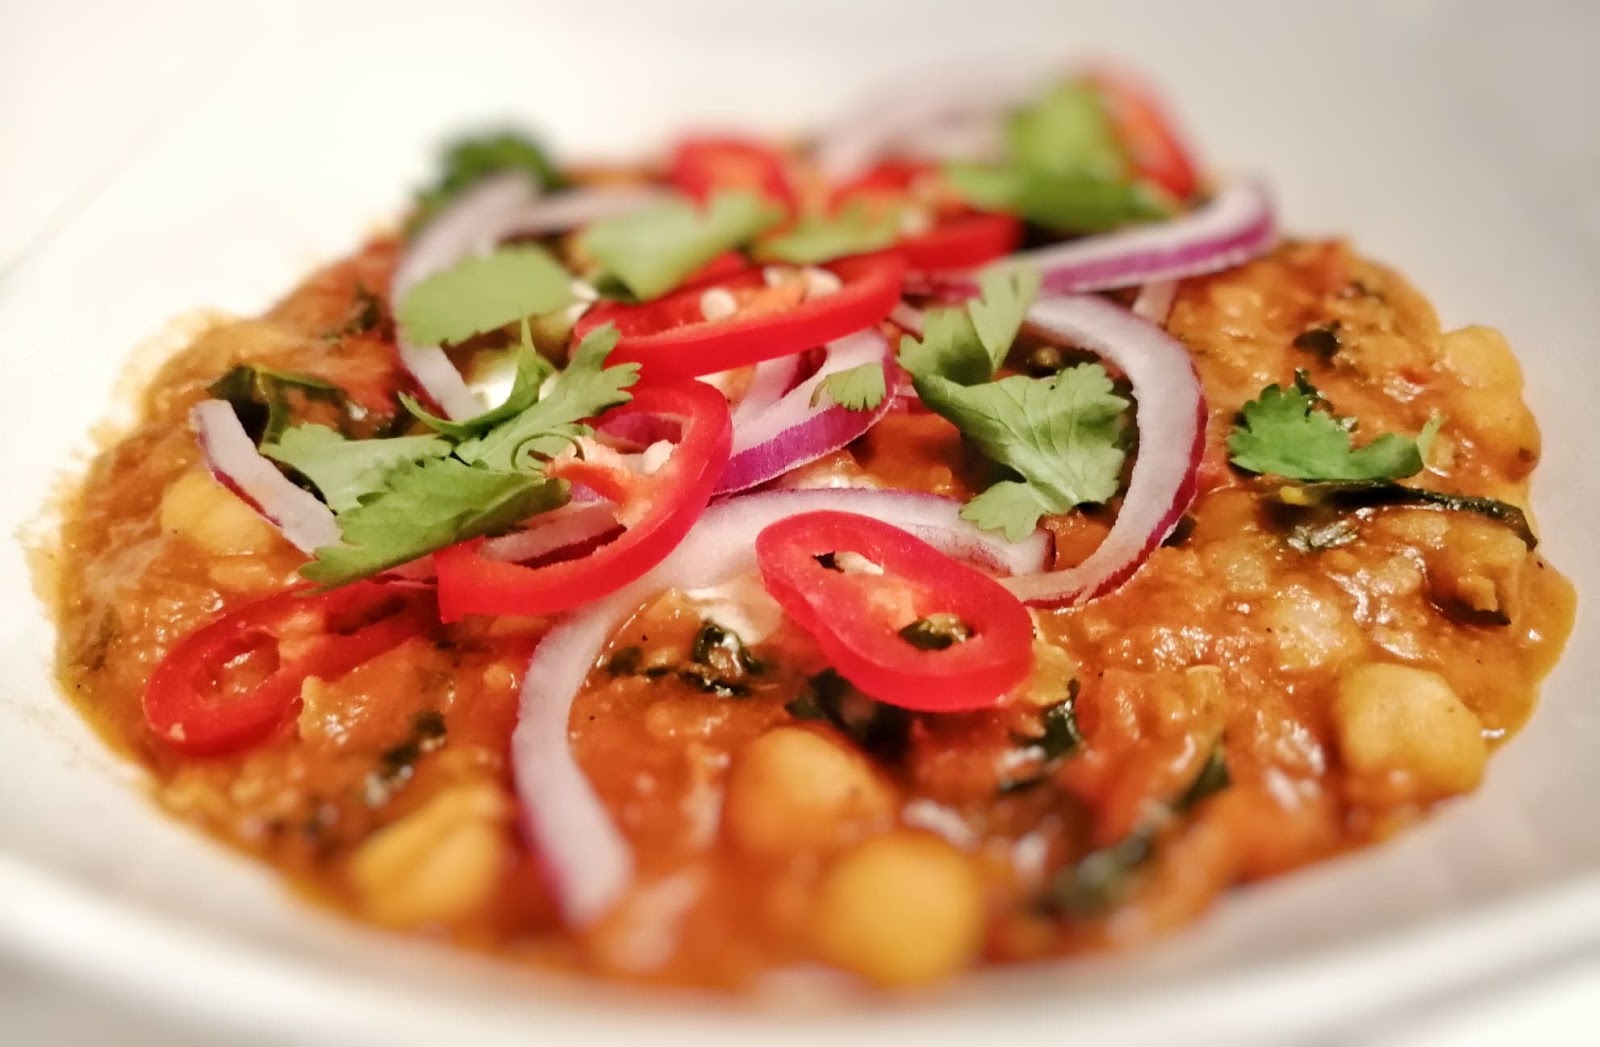 Featured Image of Resident Recipe - Lentil, Chickpea and Kale Curry